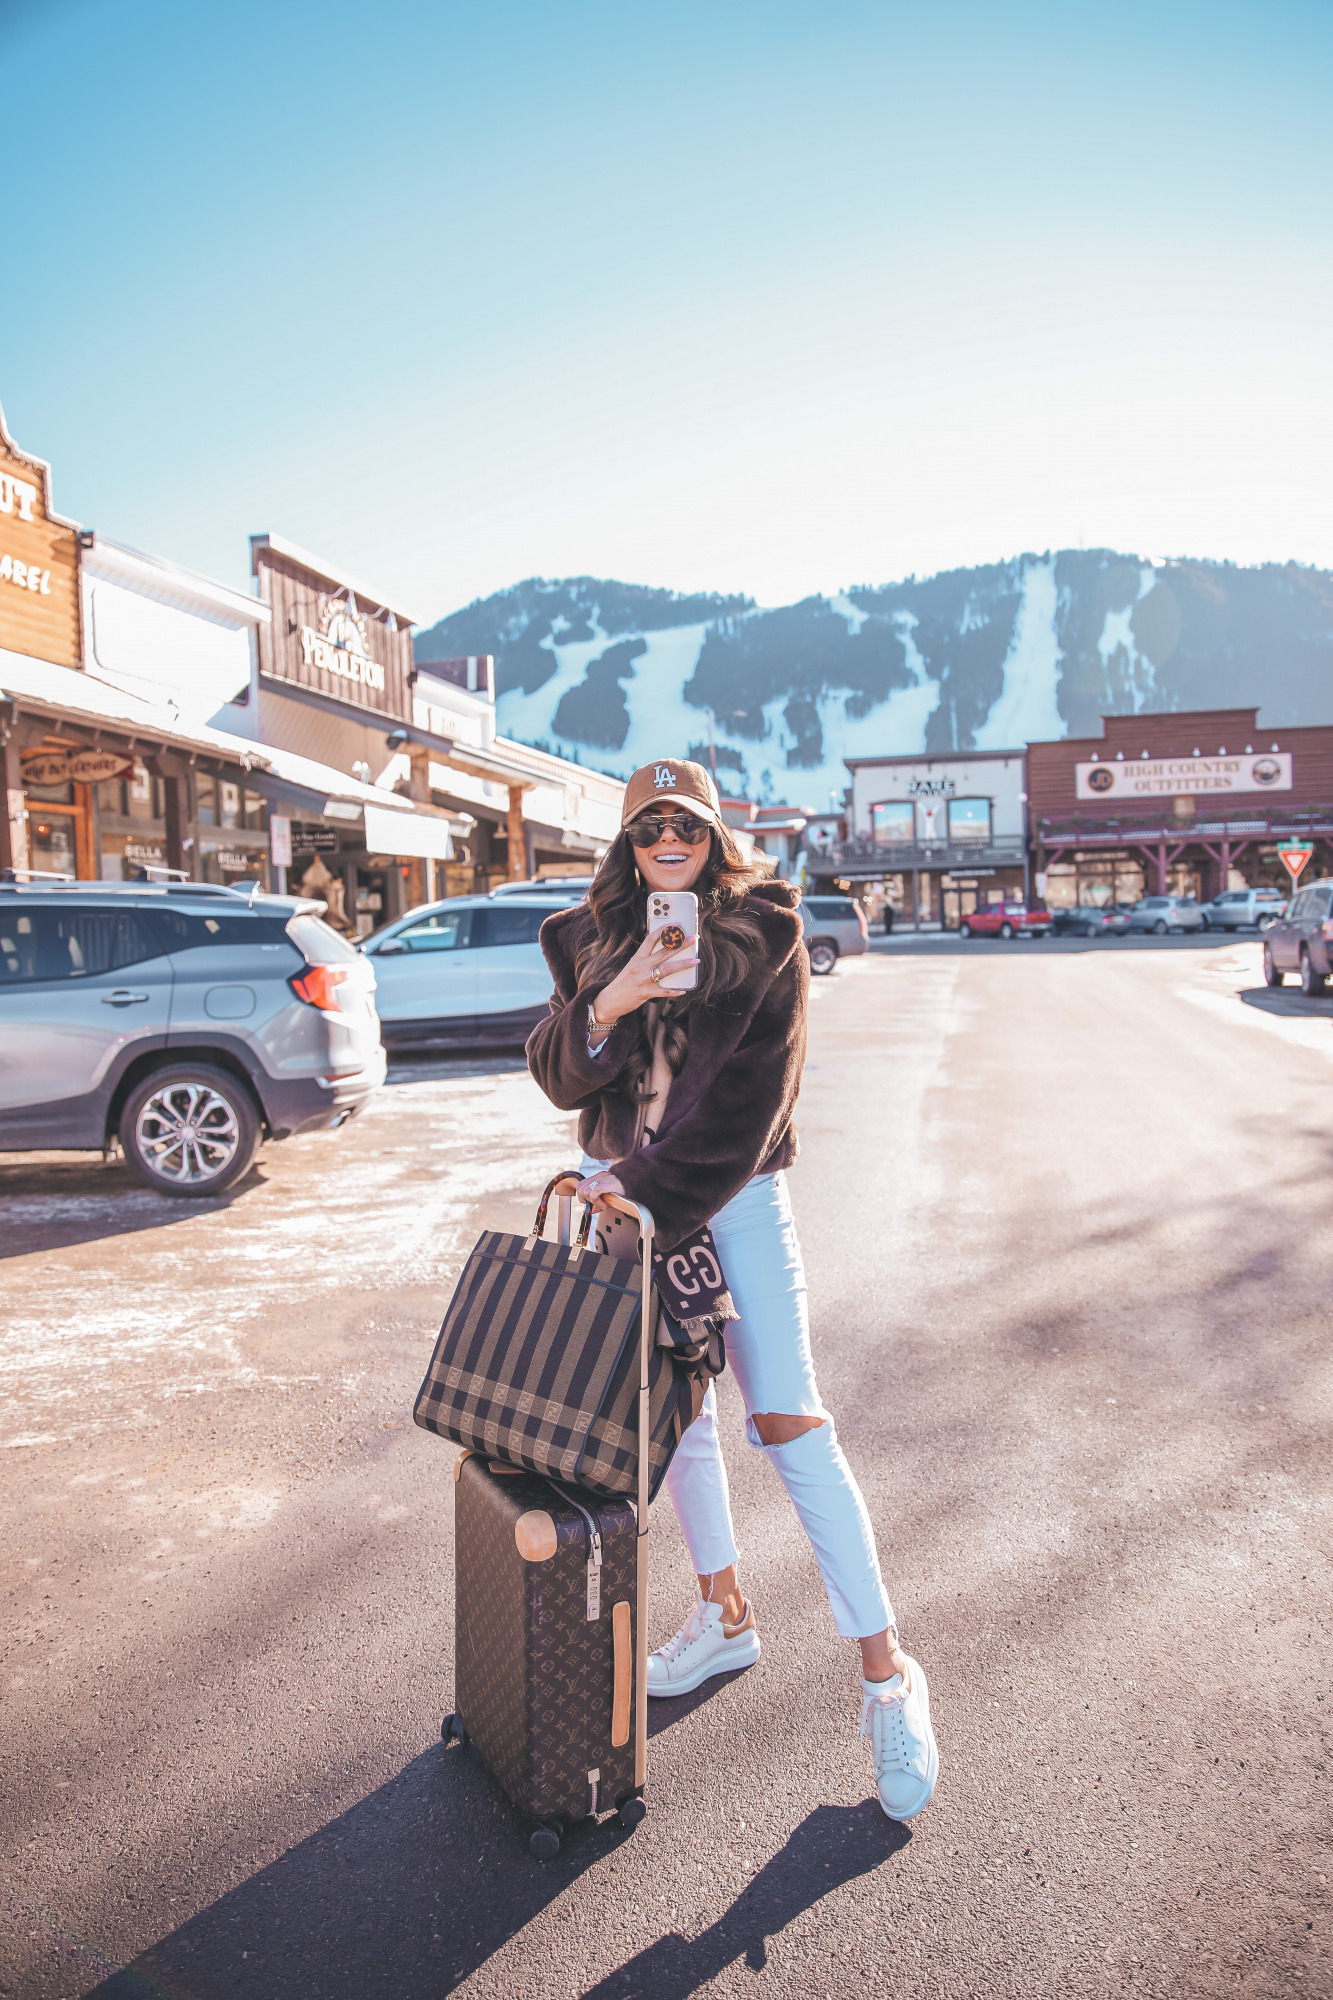 casual travel outfit idea winter 2021, airport fashion outfit idea, cute airport outfit idea winter, fendi tote bag2 |Winter Fashion by popular US fashion blog, The Sweetest Thing: image of Emily Gemma standing outside in downtown Jackson Hole, WY and wearing a Free People top, BB Dakota faux fur jacket, distressed white denim jeans, Gucci scarf, '47 brand cap, Le Specs sunglasses, and standing next to a Louis Vuitton rolling suitcase and holding a Fendi tote bag. 